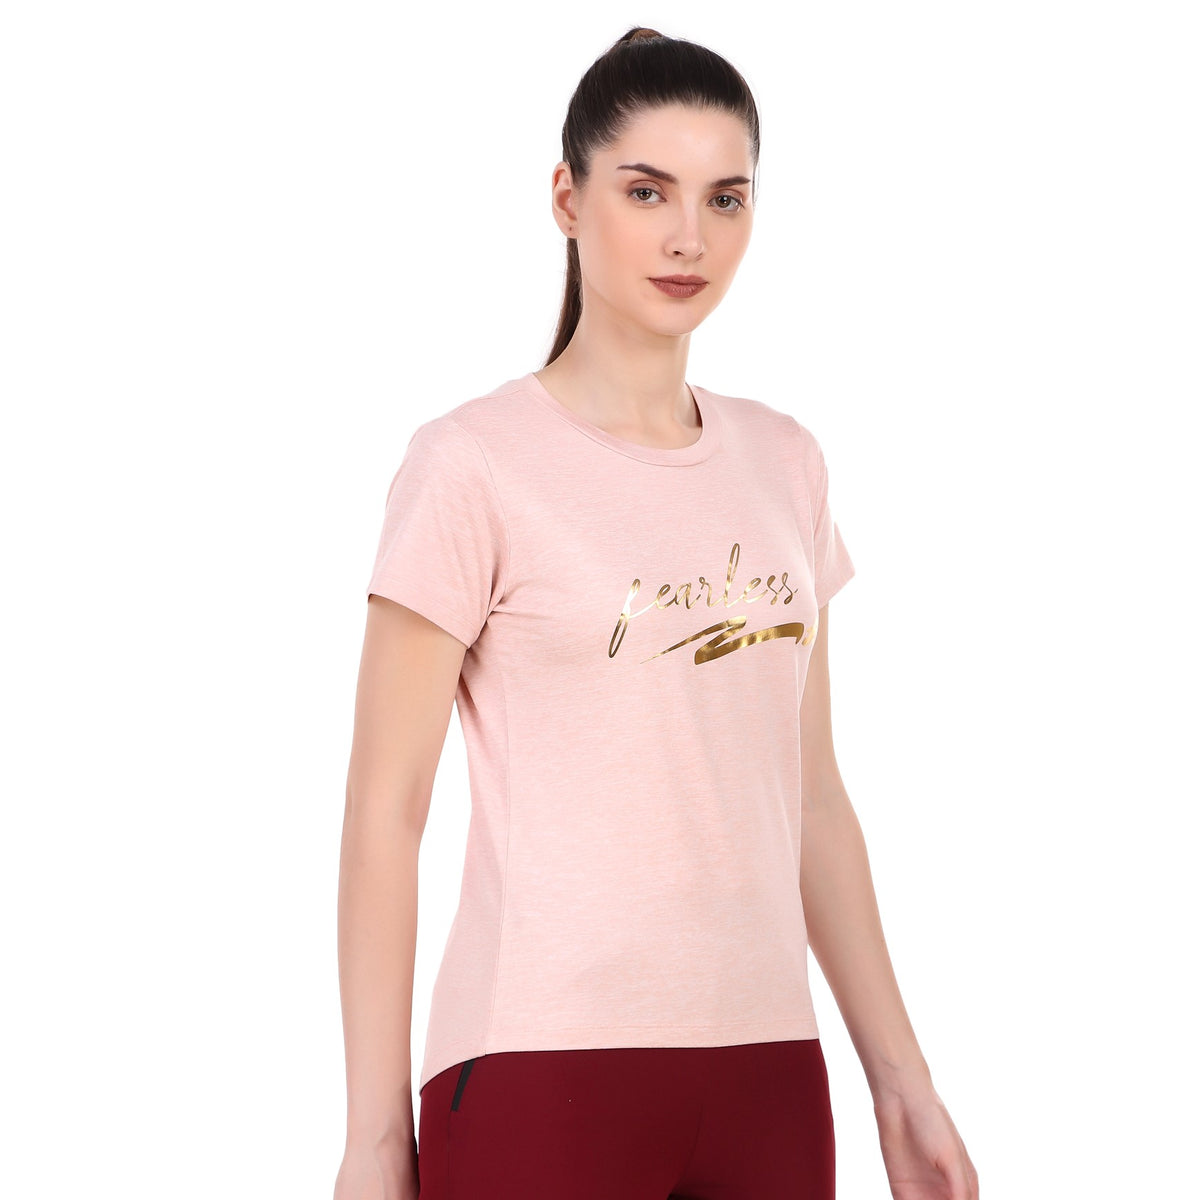 Performance Tshirt For Fearless Women (Pink Heather)